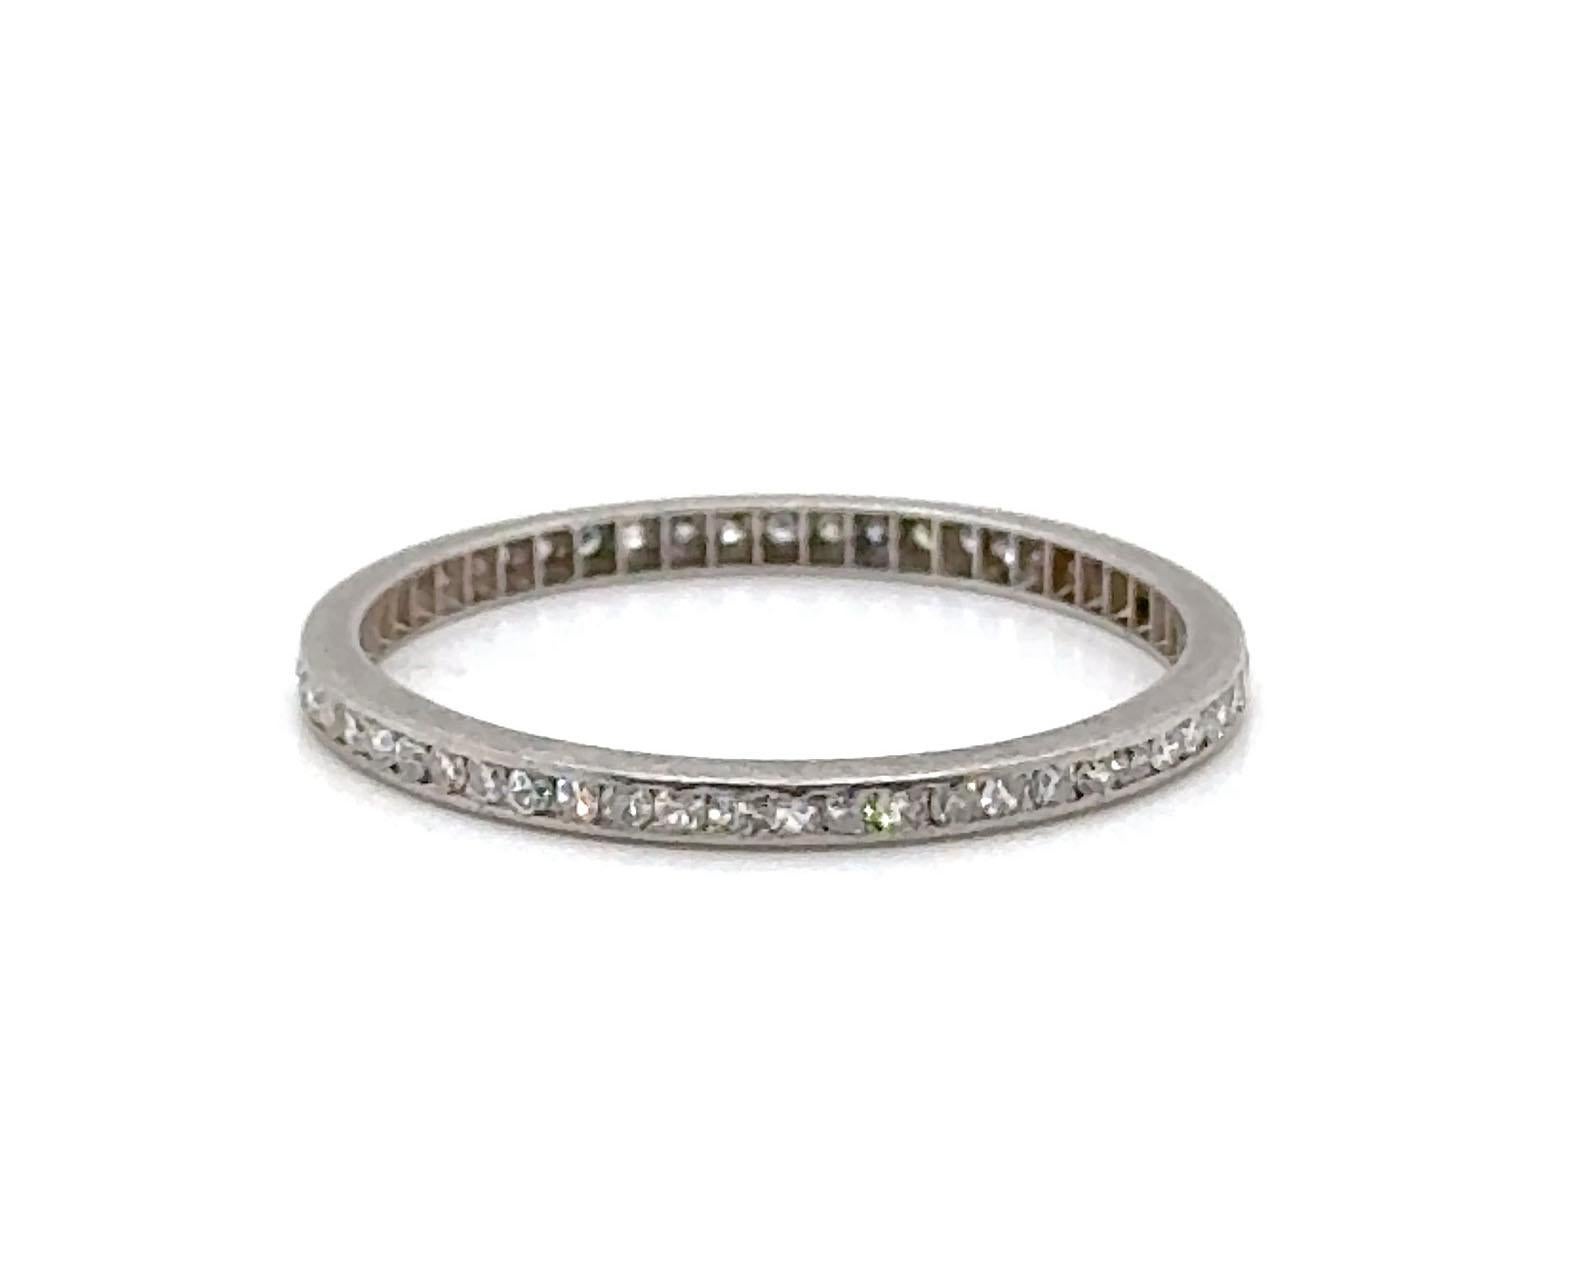 Genuine Original Antique Art Deco from 1930s Anniversary Band .75ct Single Cuts Diamond Platinum Ring 



Stunning Piece Featuring Matching Clean and Colorless Natural Mined Single Cuts, each Contributing to the Overall Brilliance of this Exquisite